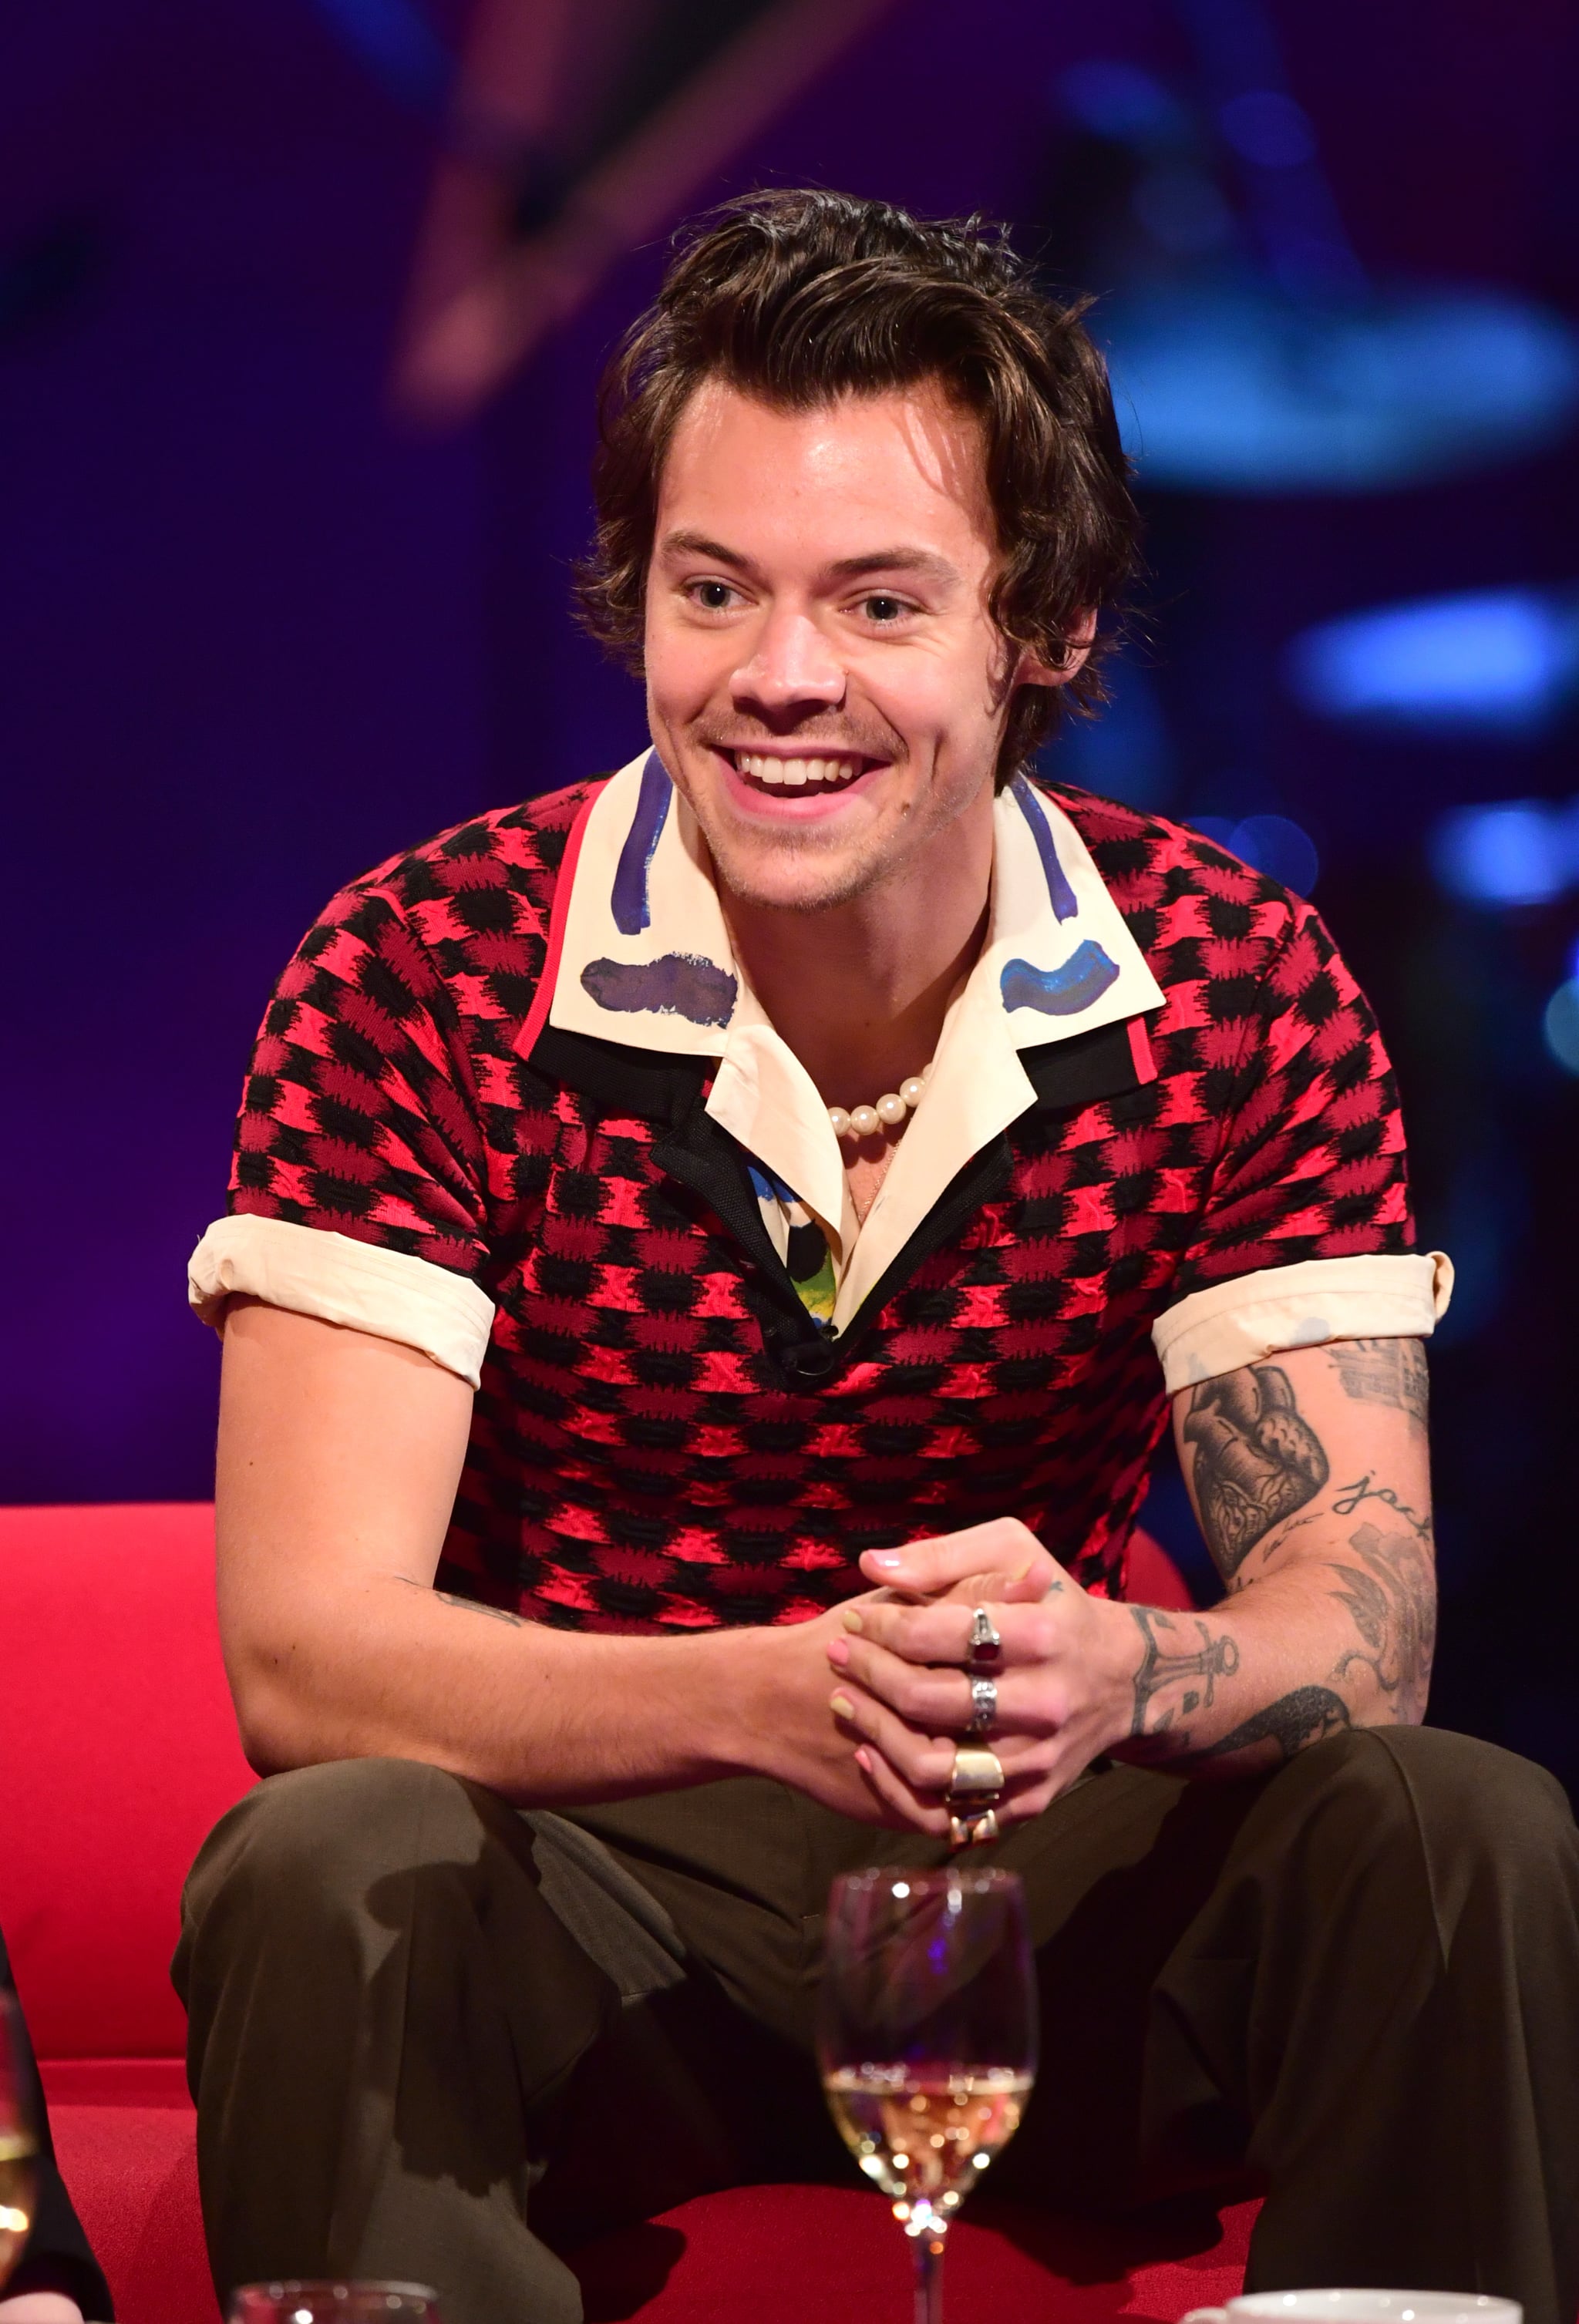 Pictures Of Harry Styles Smiling And Laughing Popsugar Celebrity